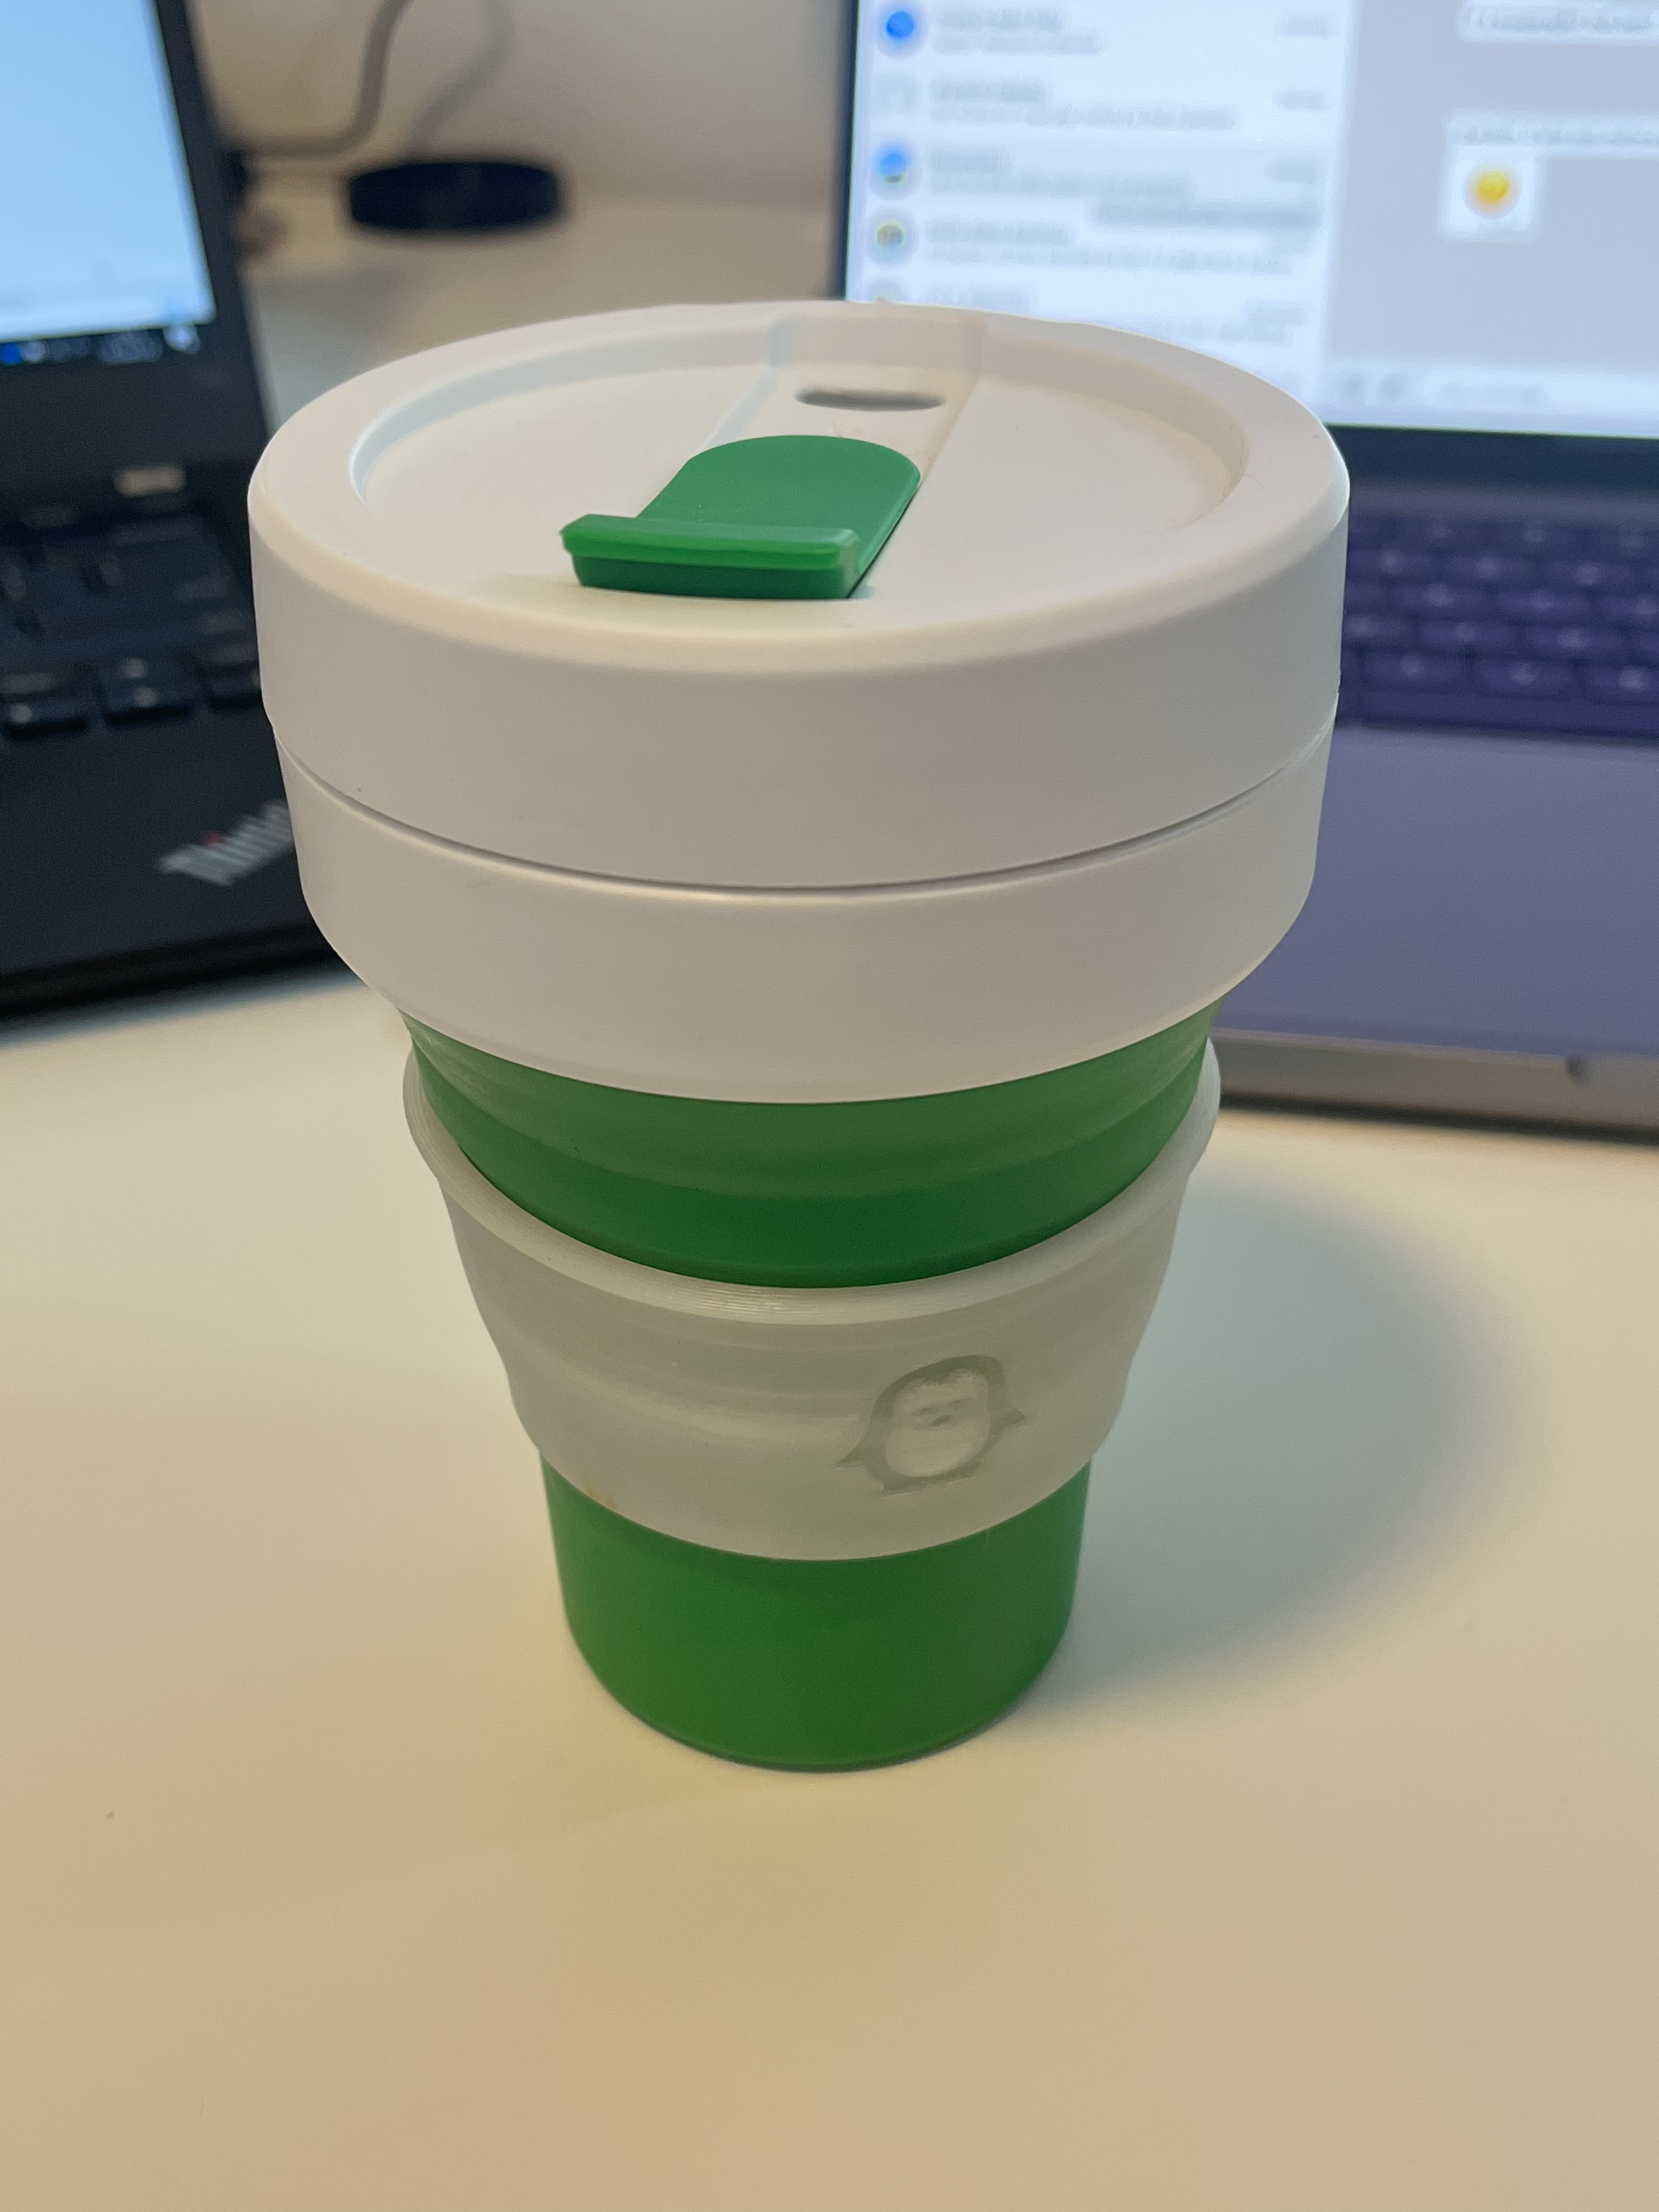 Stojo collapsible coffee cup sleeve